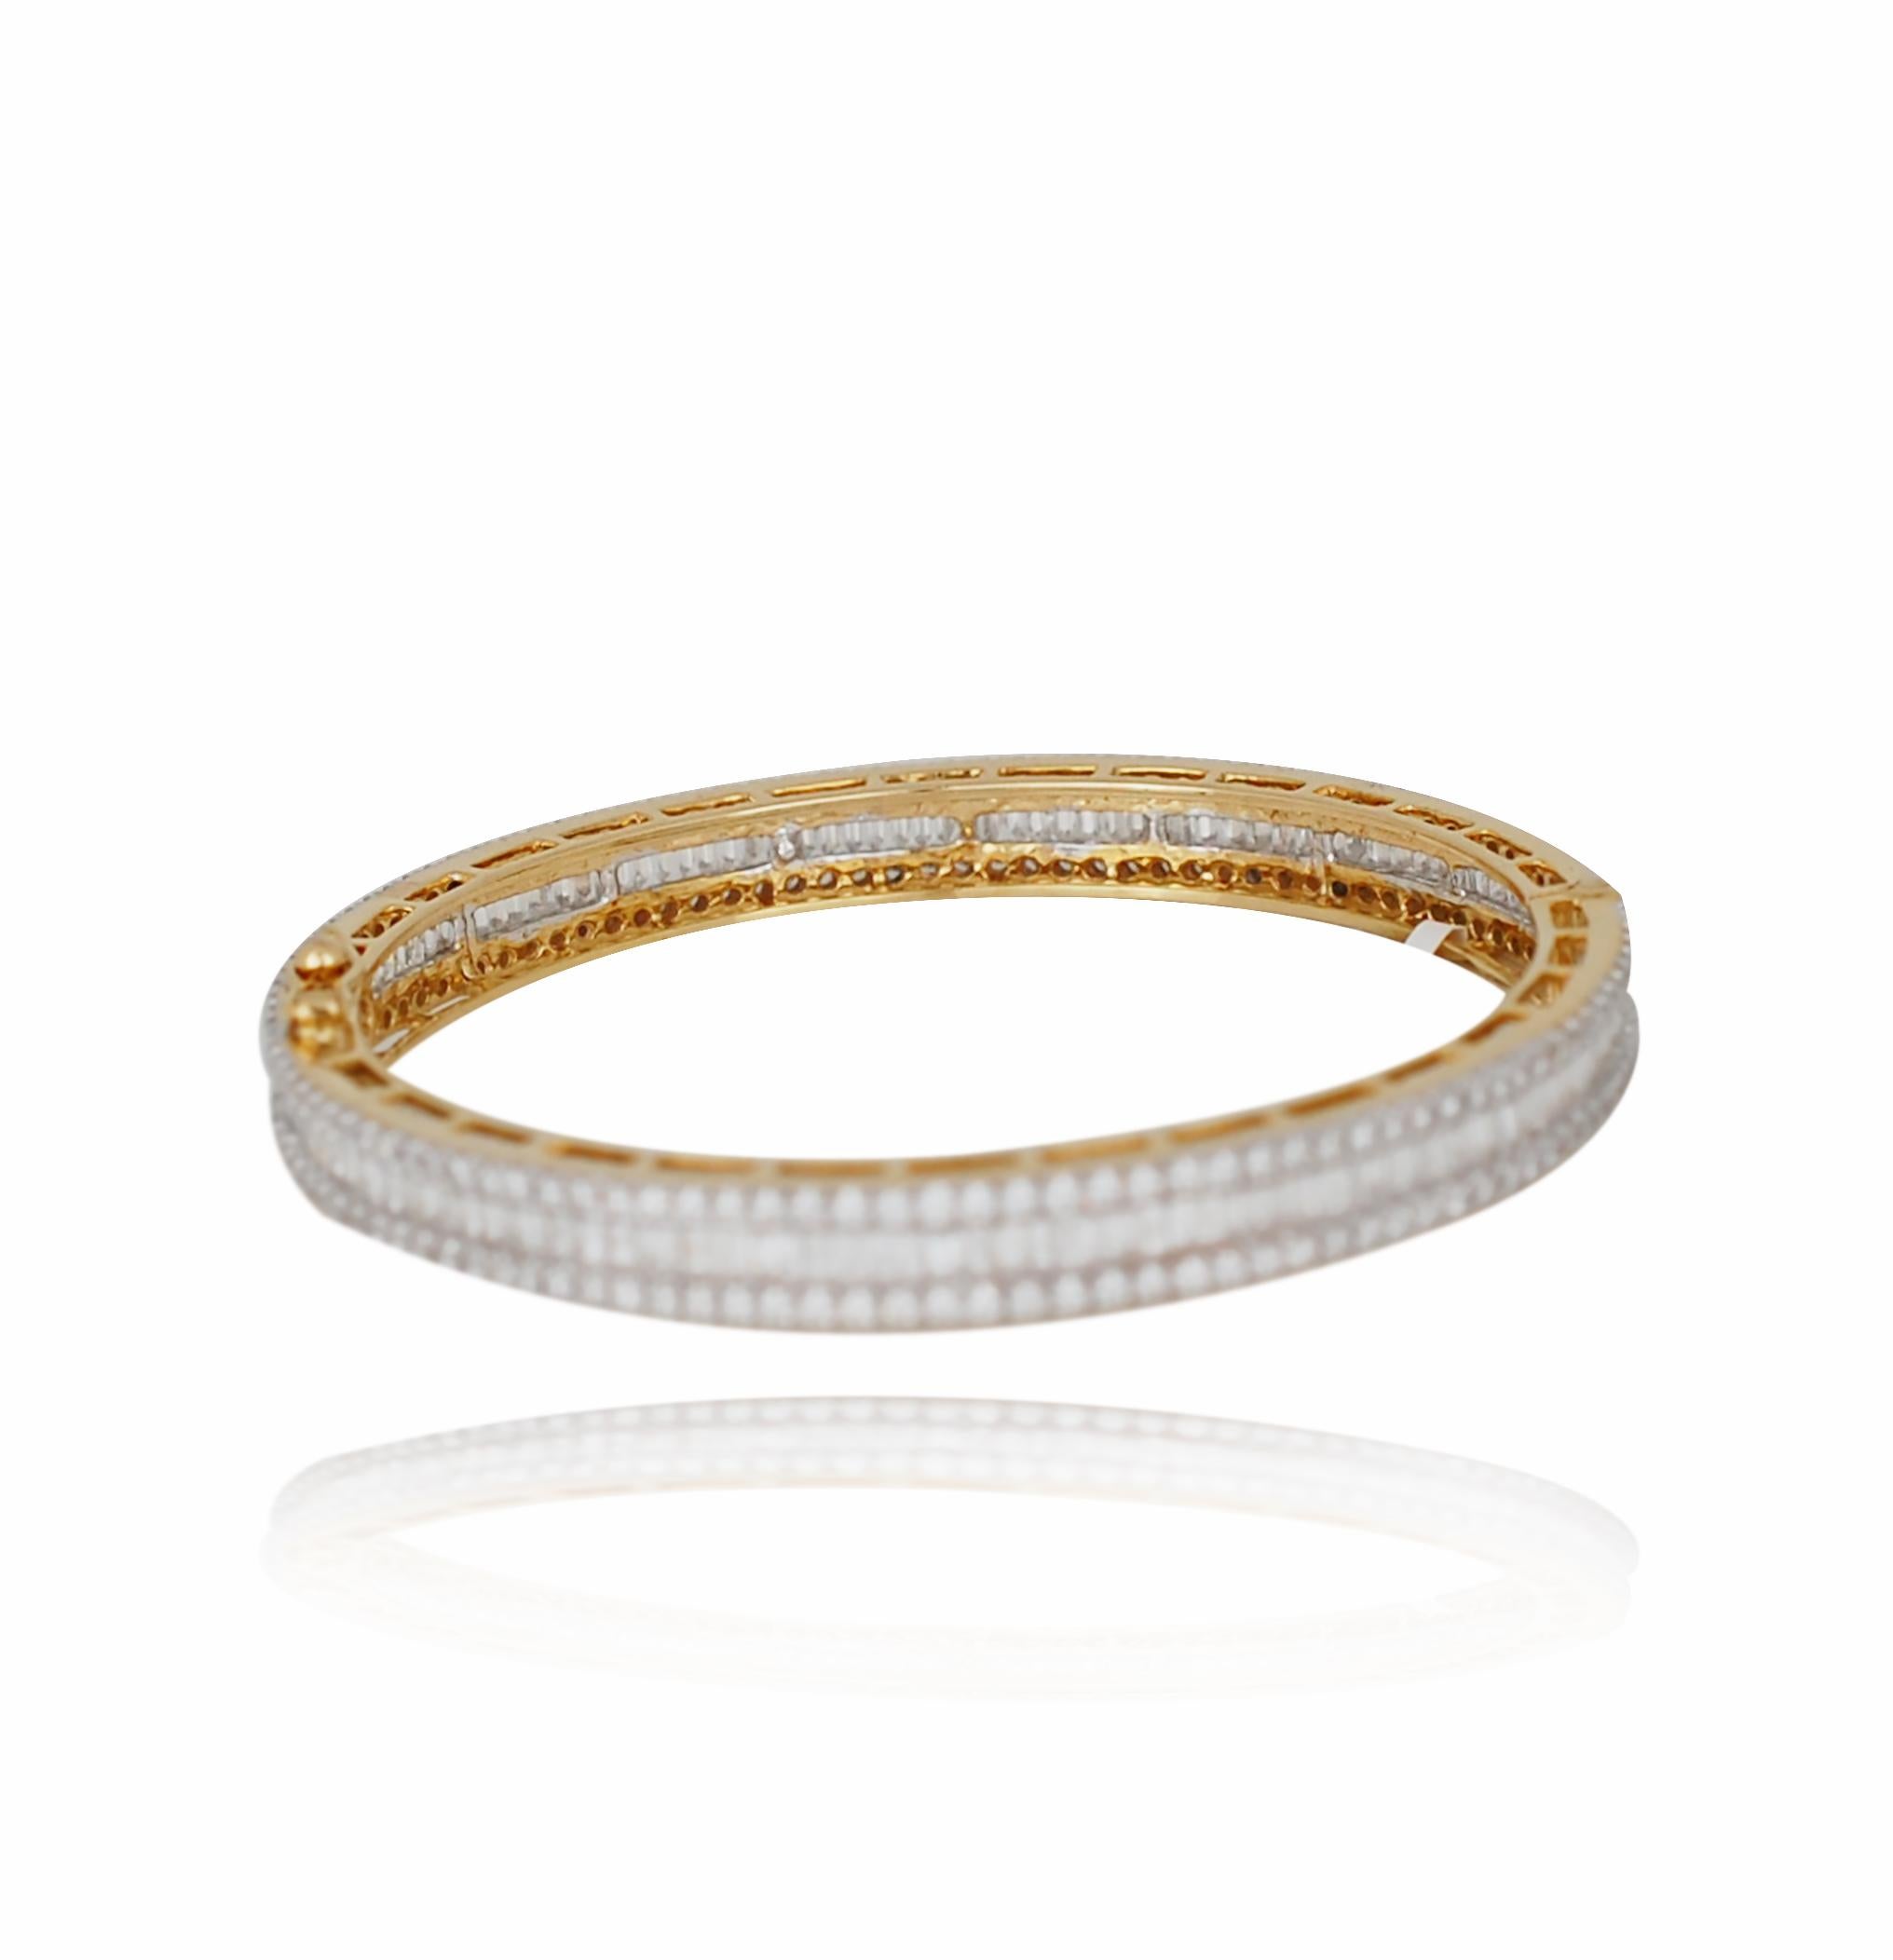 A classic diamond cuff can be seen below with over 7.75 carats of bright white E-F VS.  This baguette has both baguette and round brilliant cut diamonds.  The bracelet has a gorgeous white look with edges of yellow accented 18k gold.  The bracelet